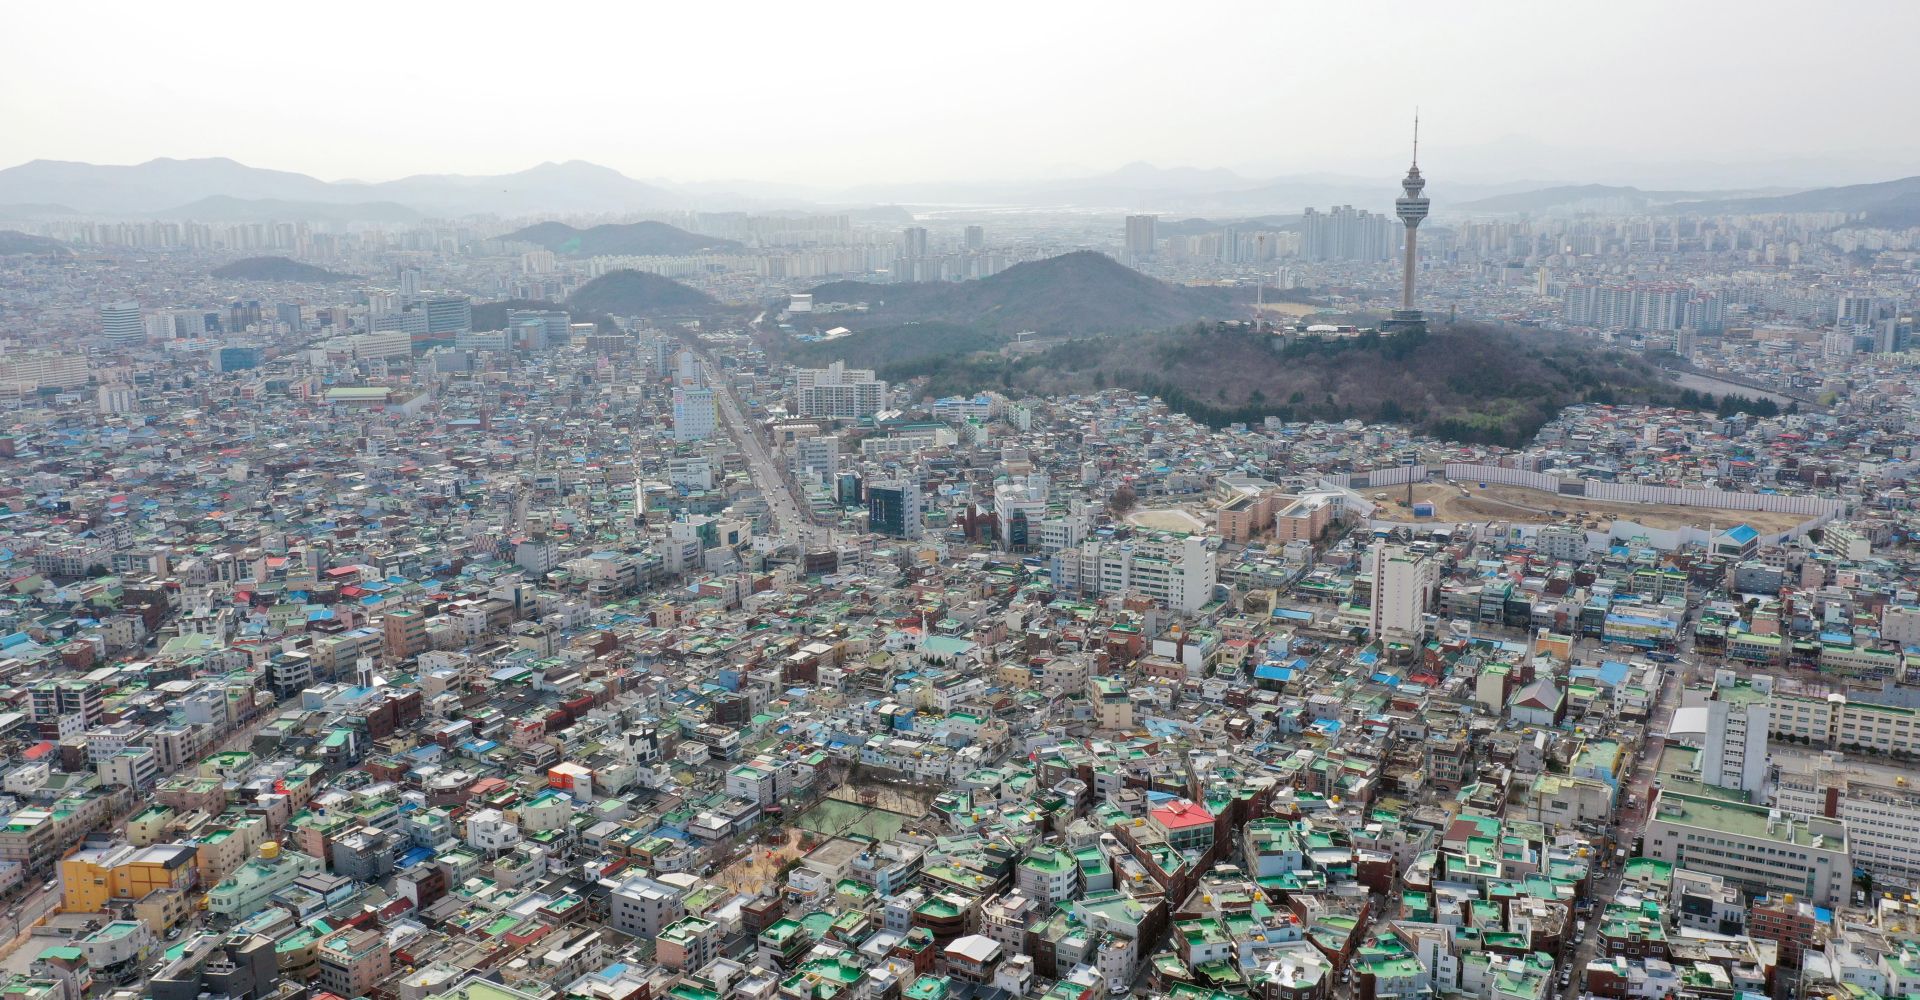 epa08291195 An aerial view of the coronavirus-hit city of Daegu, South Korea, 13 March 2020. South Korea’s Central Disaster and Safety Countermeasures Headquarters plans to designate the city, 302 kilometers southeast of Seoul, and surrounding North Gyeongsang Province as ‘special disaster zones’ starting 15 March. The move should provide a variety of benefits, including tax cuts to residents.  EPA/YONHAP SOUTH KOREA OUT